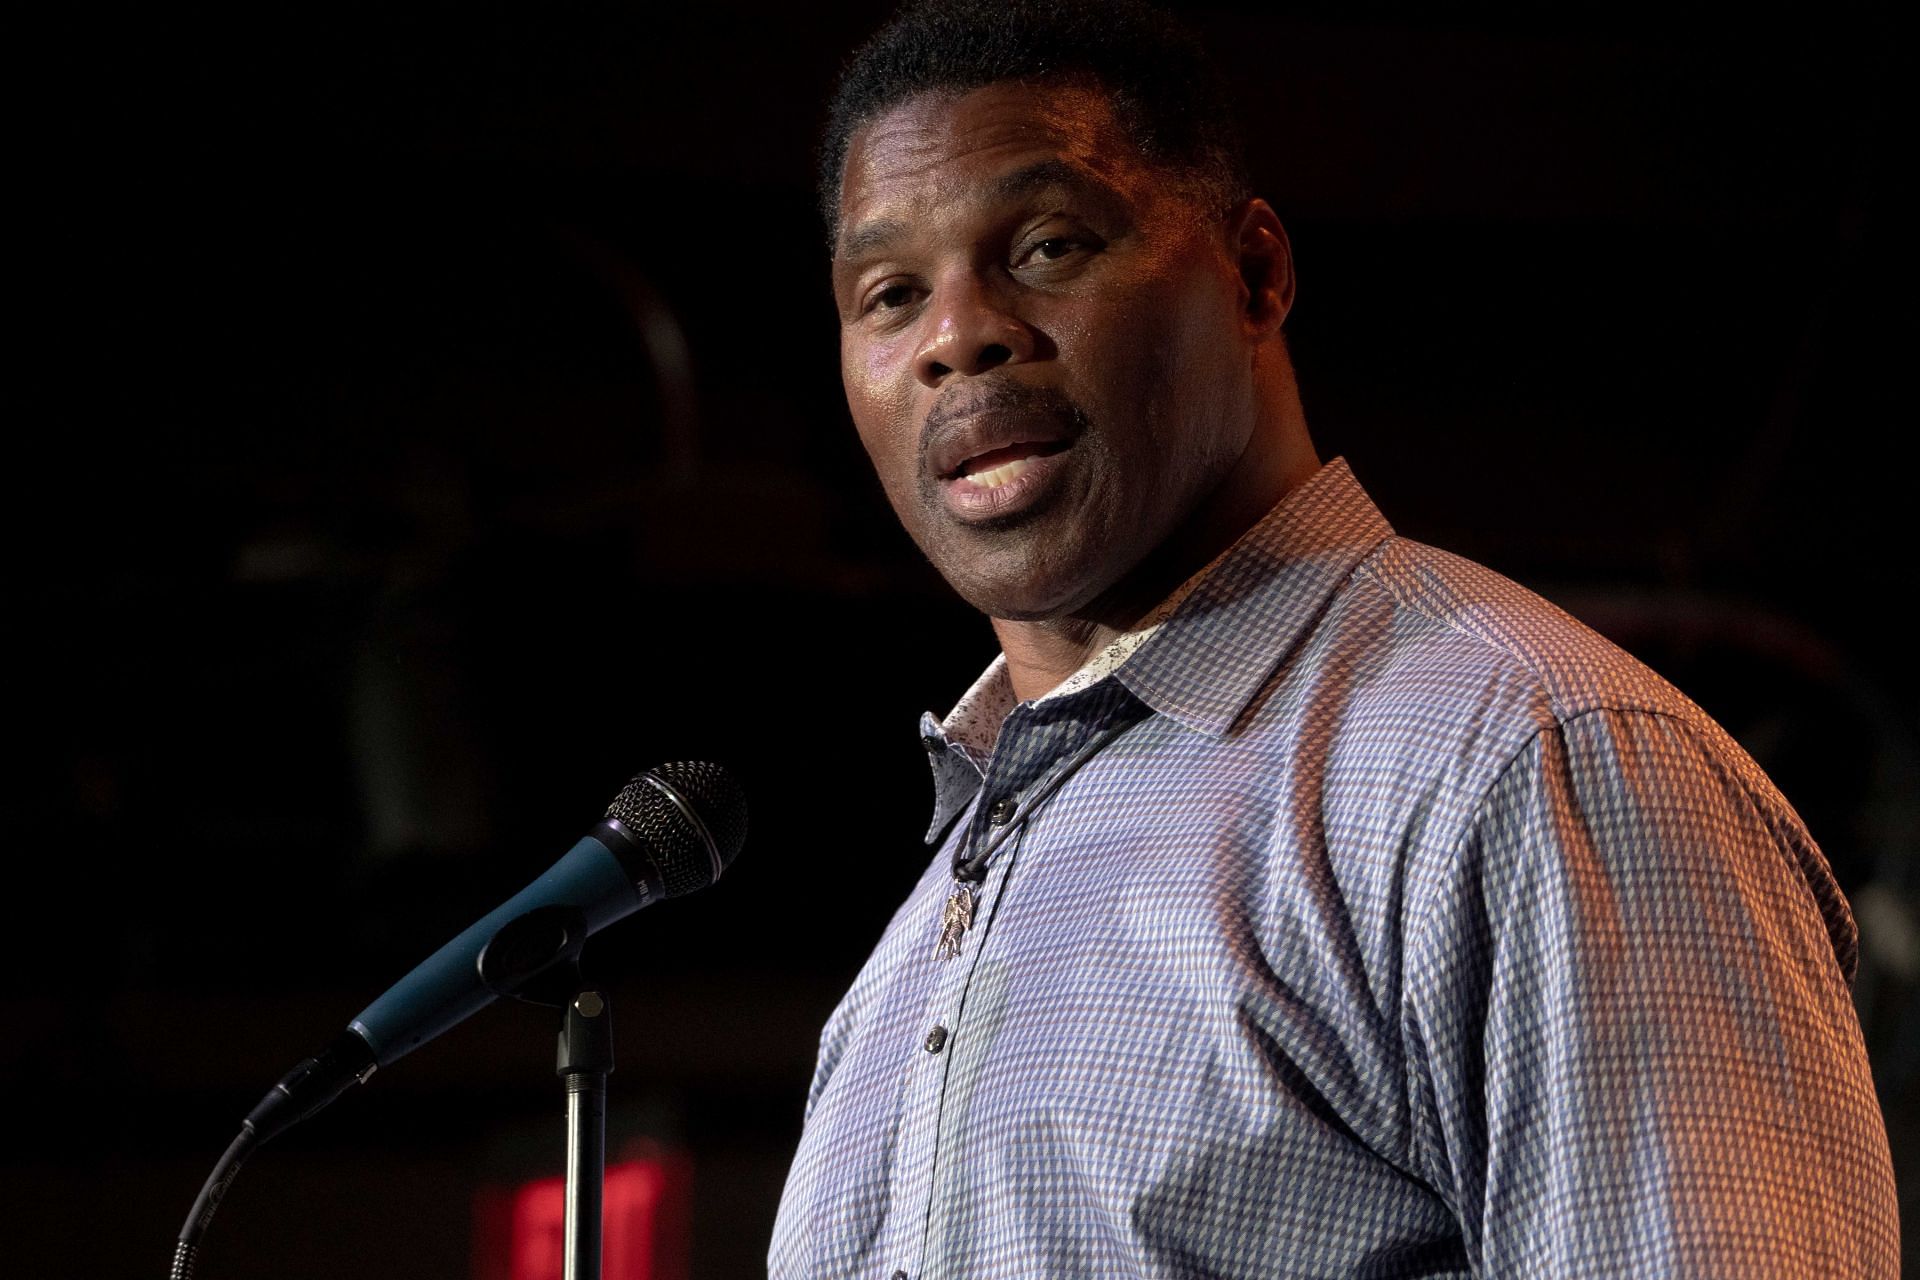 Georgia GOP Senate Candidate Herschel Walker Holds Rally Day Before Primary Election